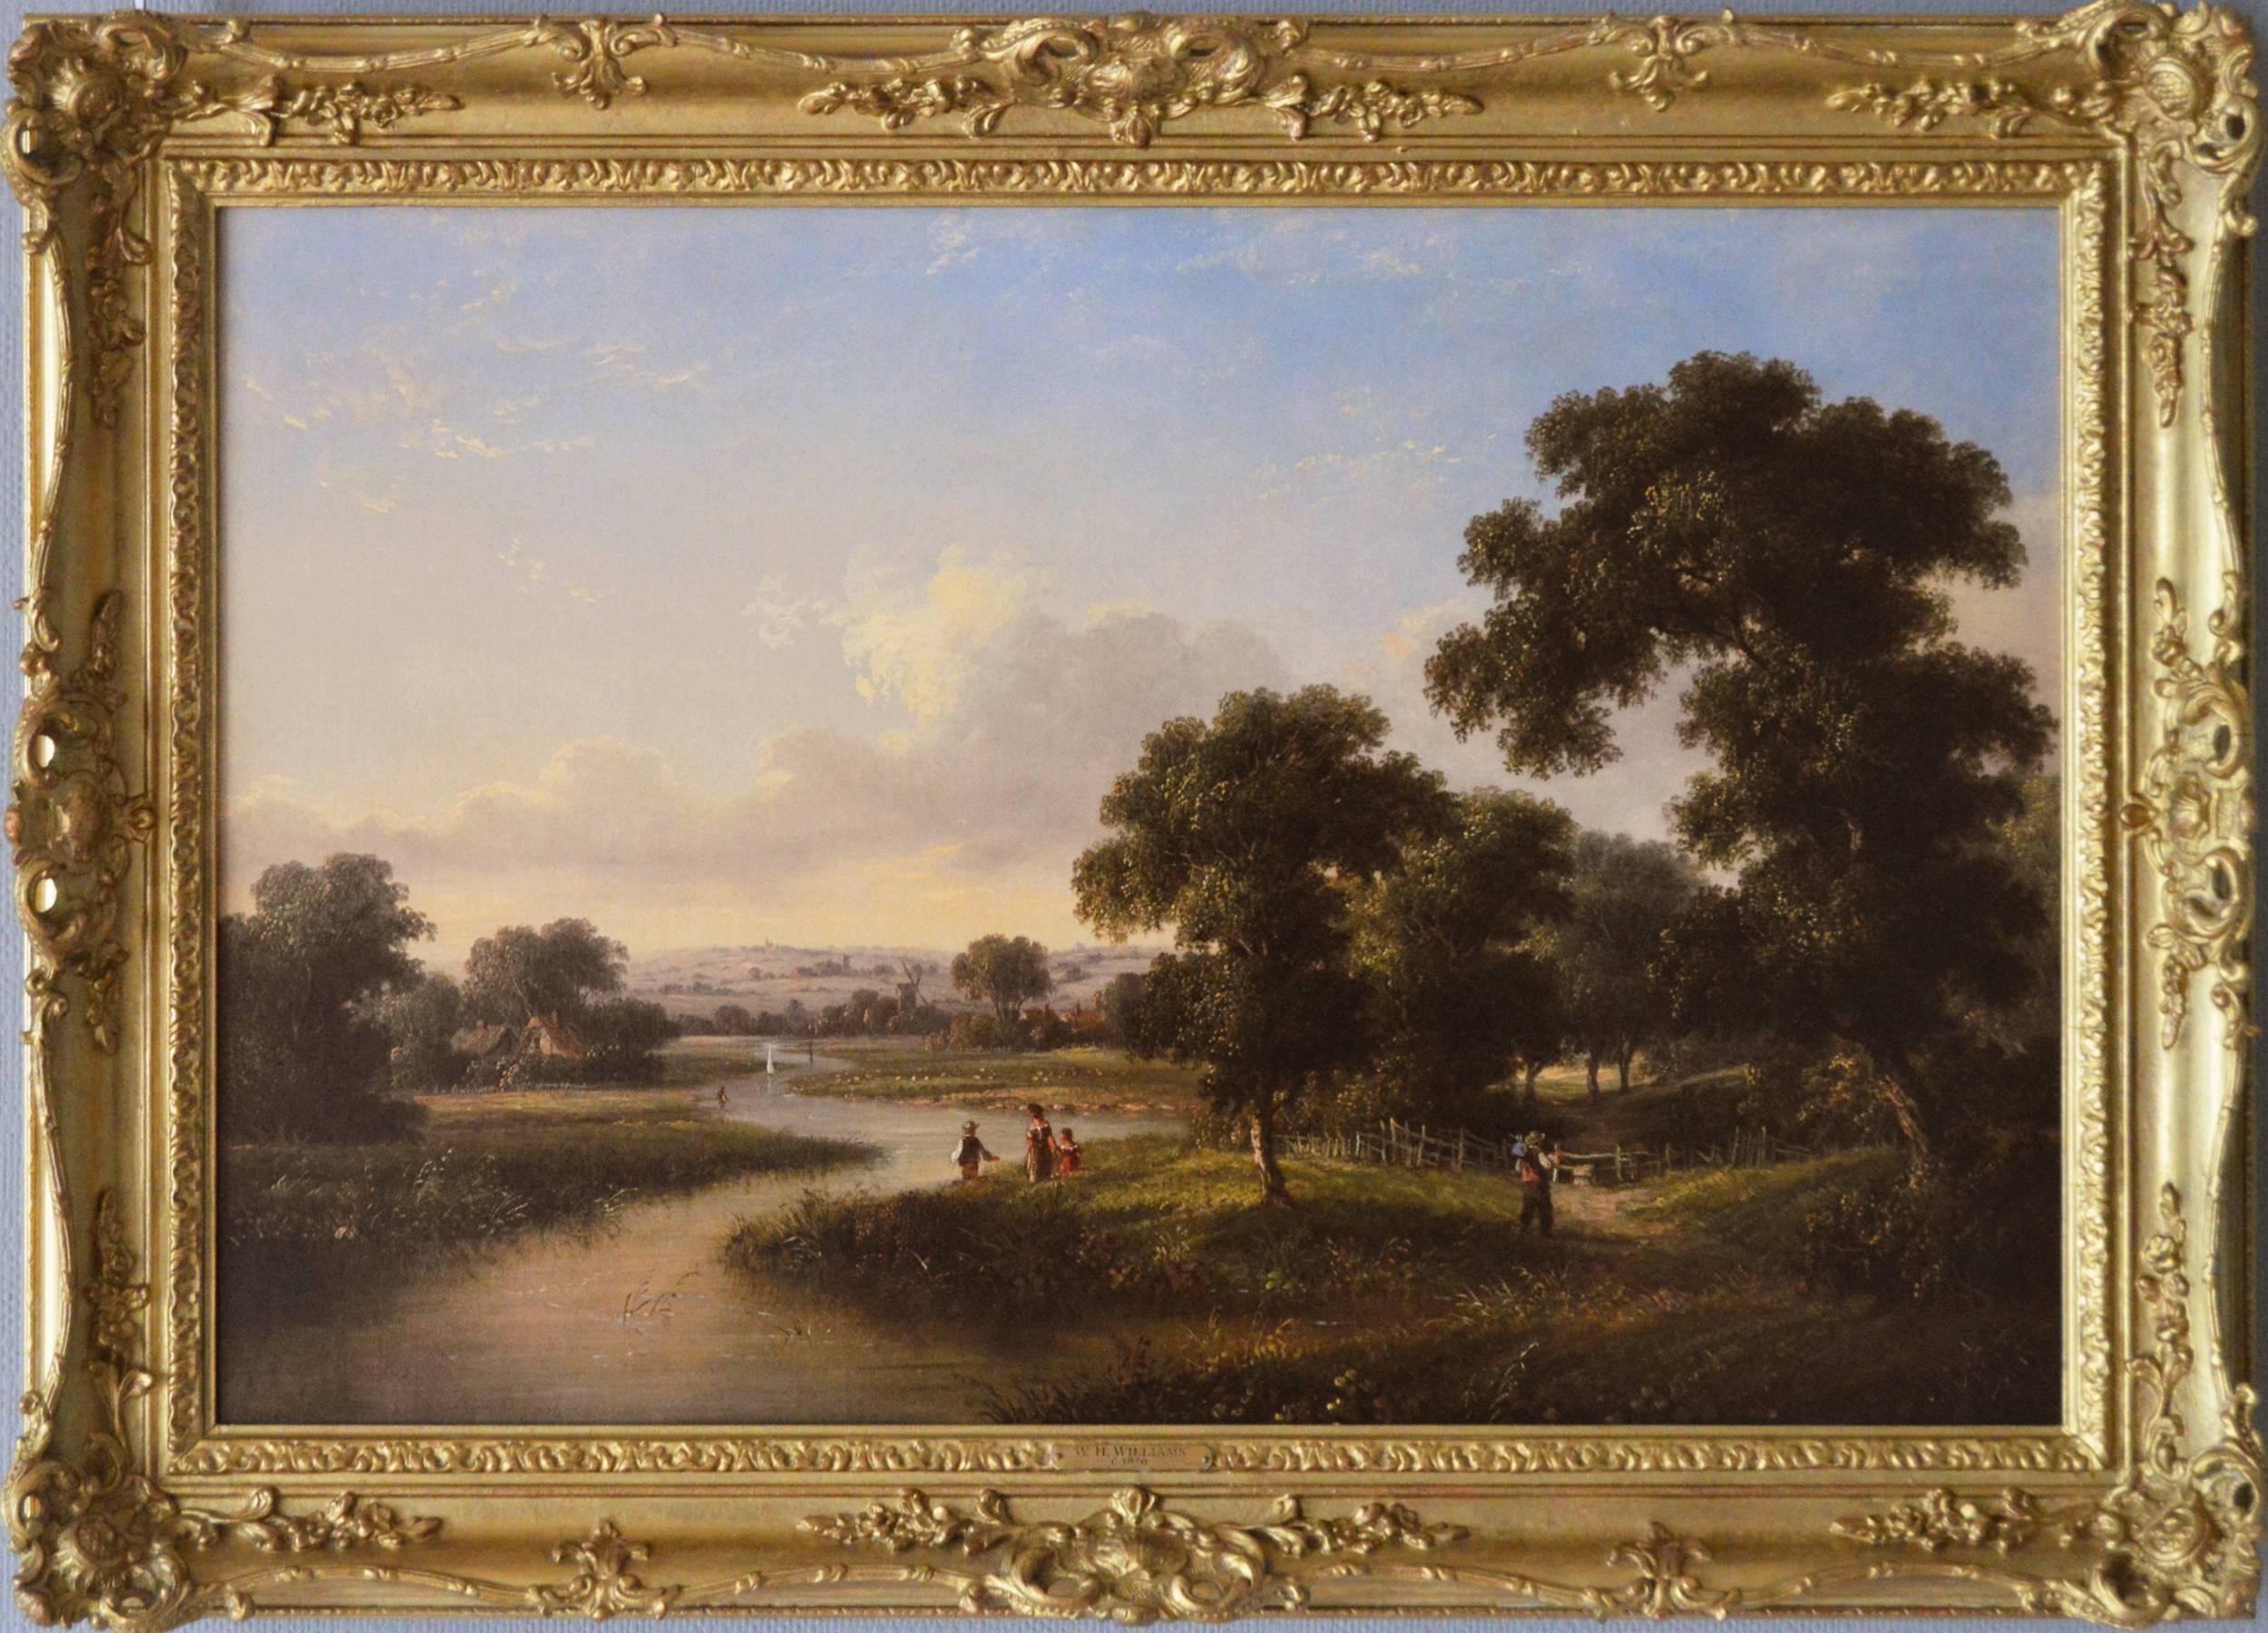 Walter Heath Williams Landscape Painting - Figures by the River 